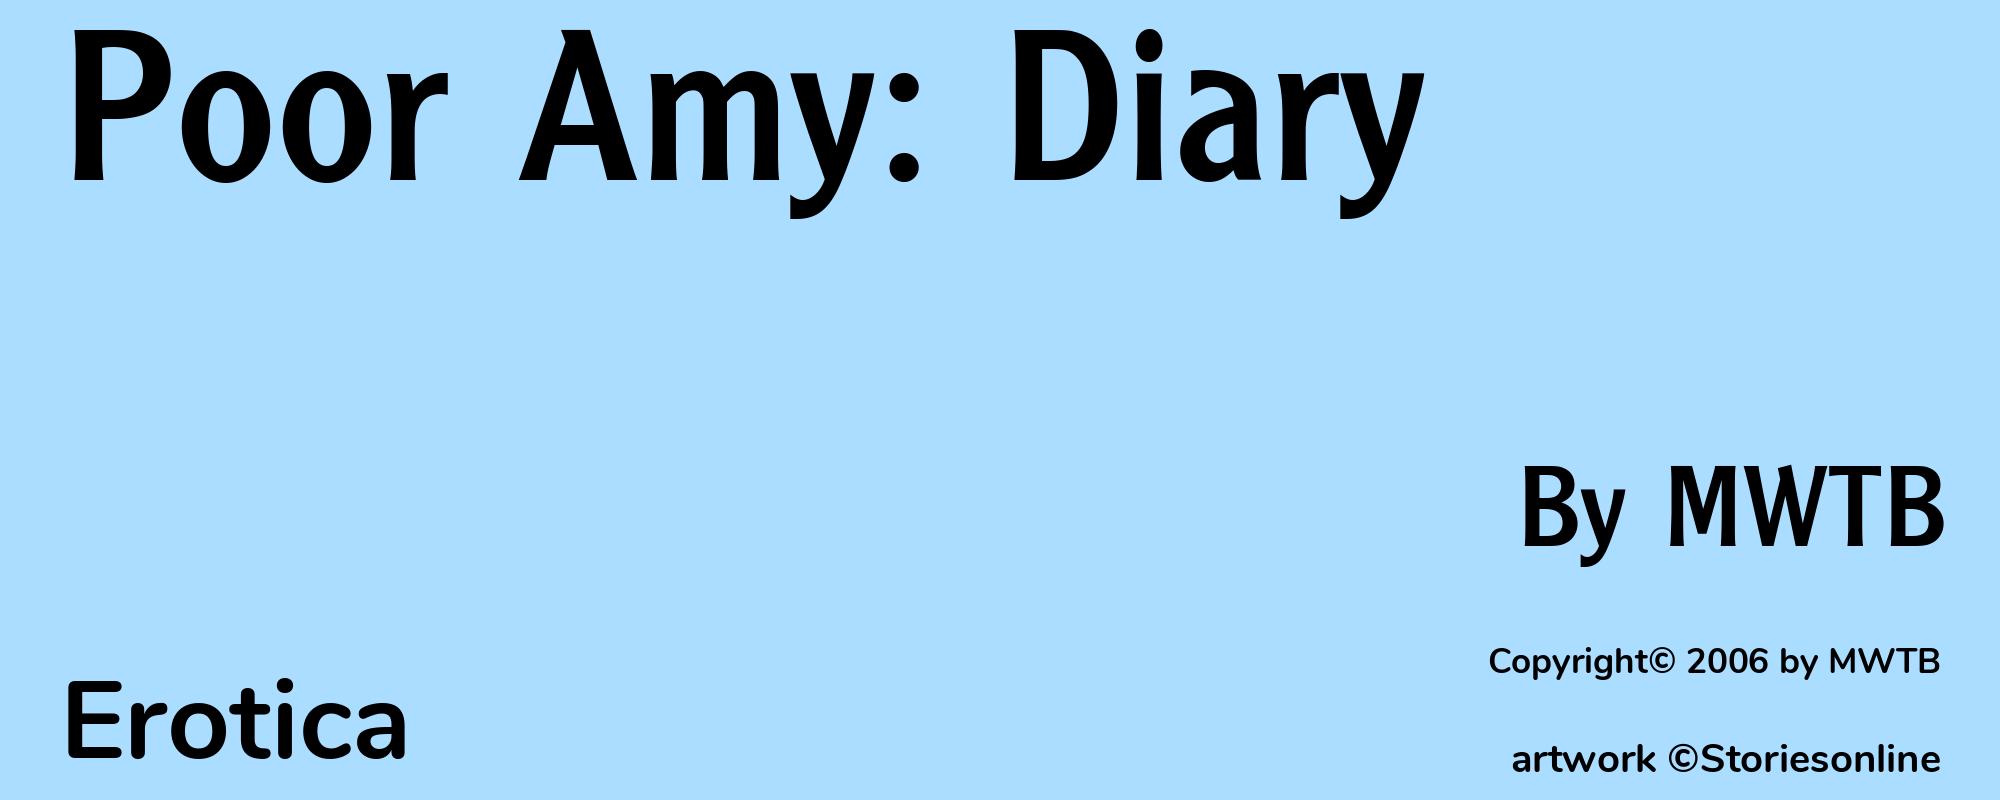 Poor Amy: Diary - Cover